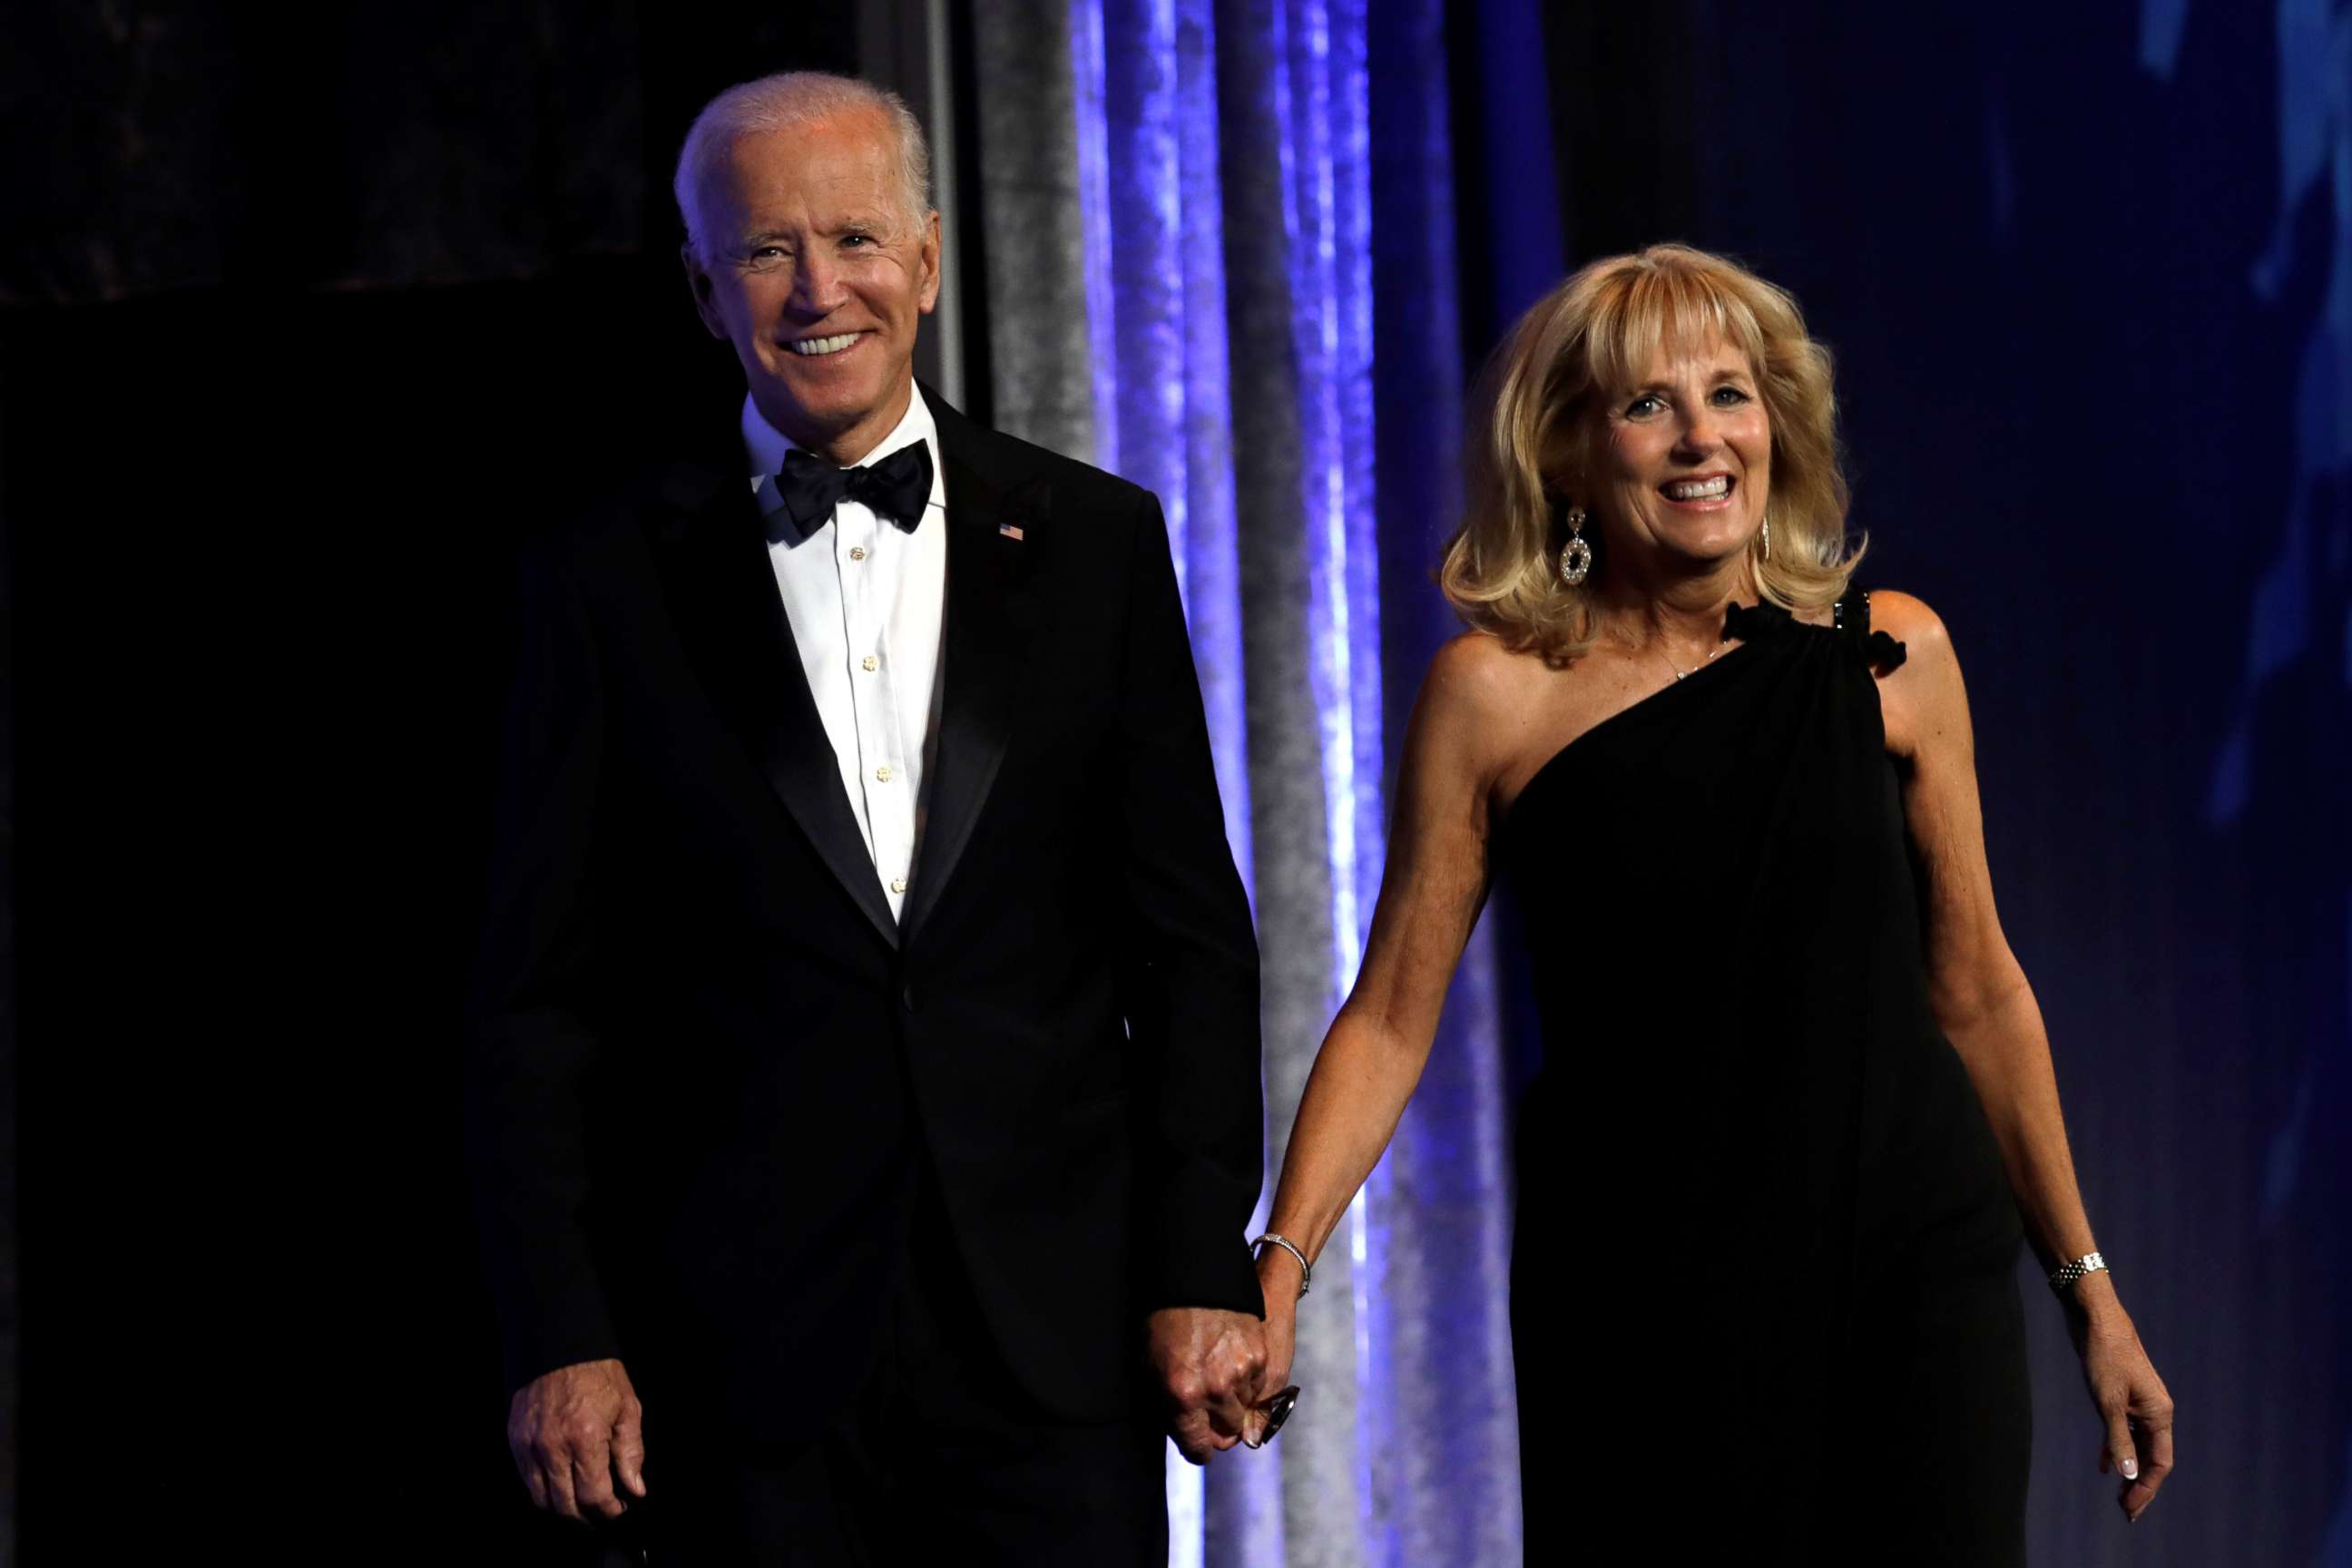 PHOTO: In this Sept. 15, 2018, file photo, former Vice President Joe Biden, with his wife Jill Biden, arrives to address the Human Rights Campaign dinner in Washington, D.C.